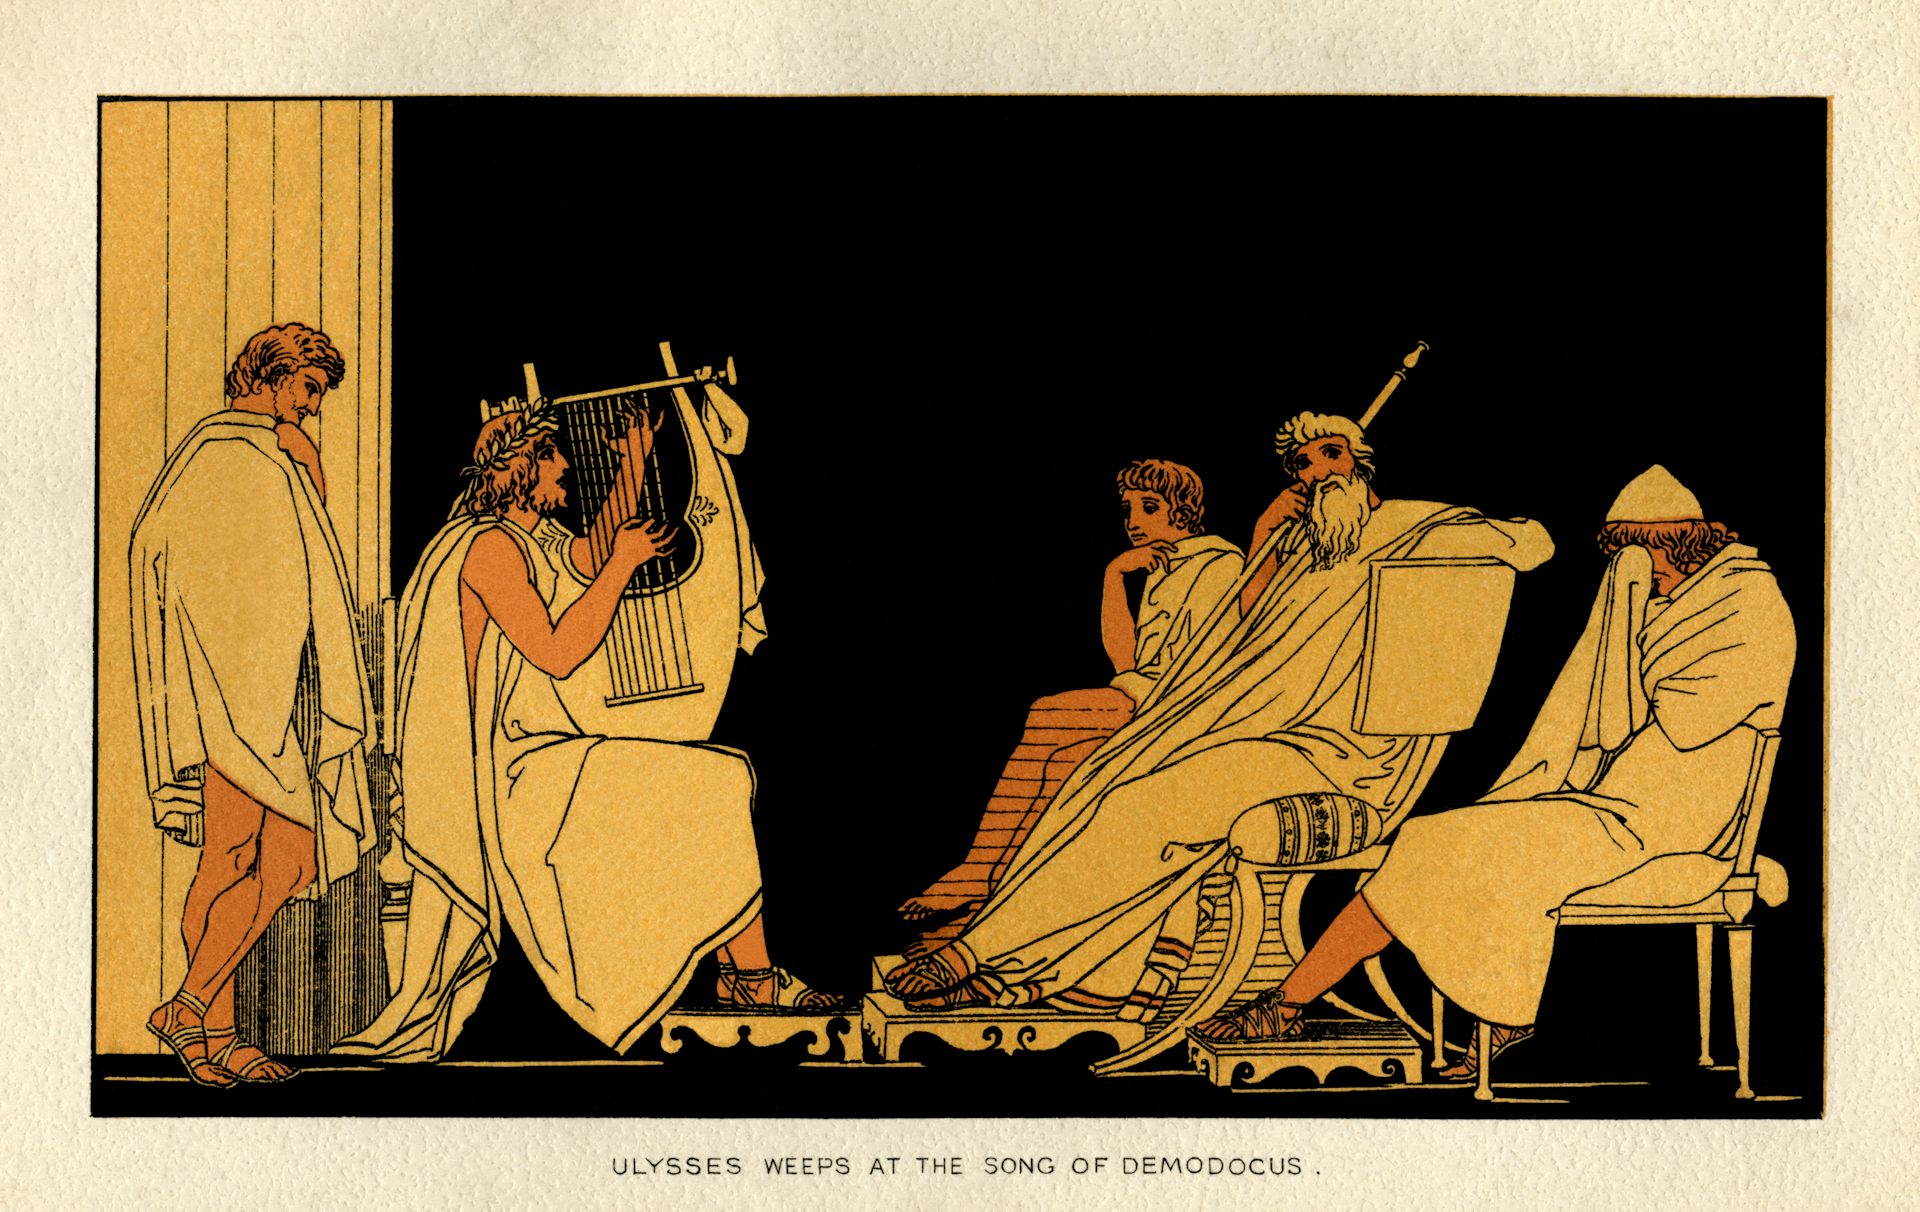 An illustration, based on ancient Greek literature, depicting a man weeping as another man nearby plays the harp.